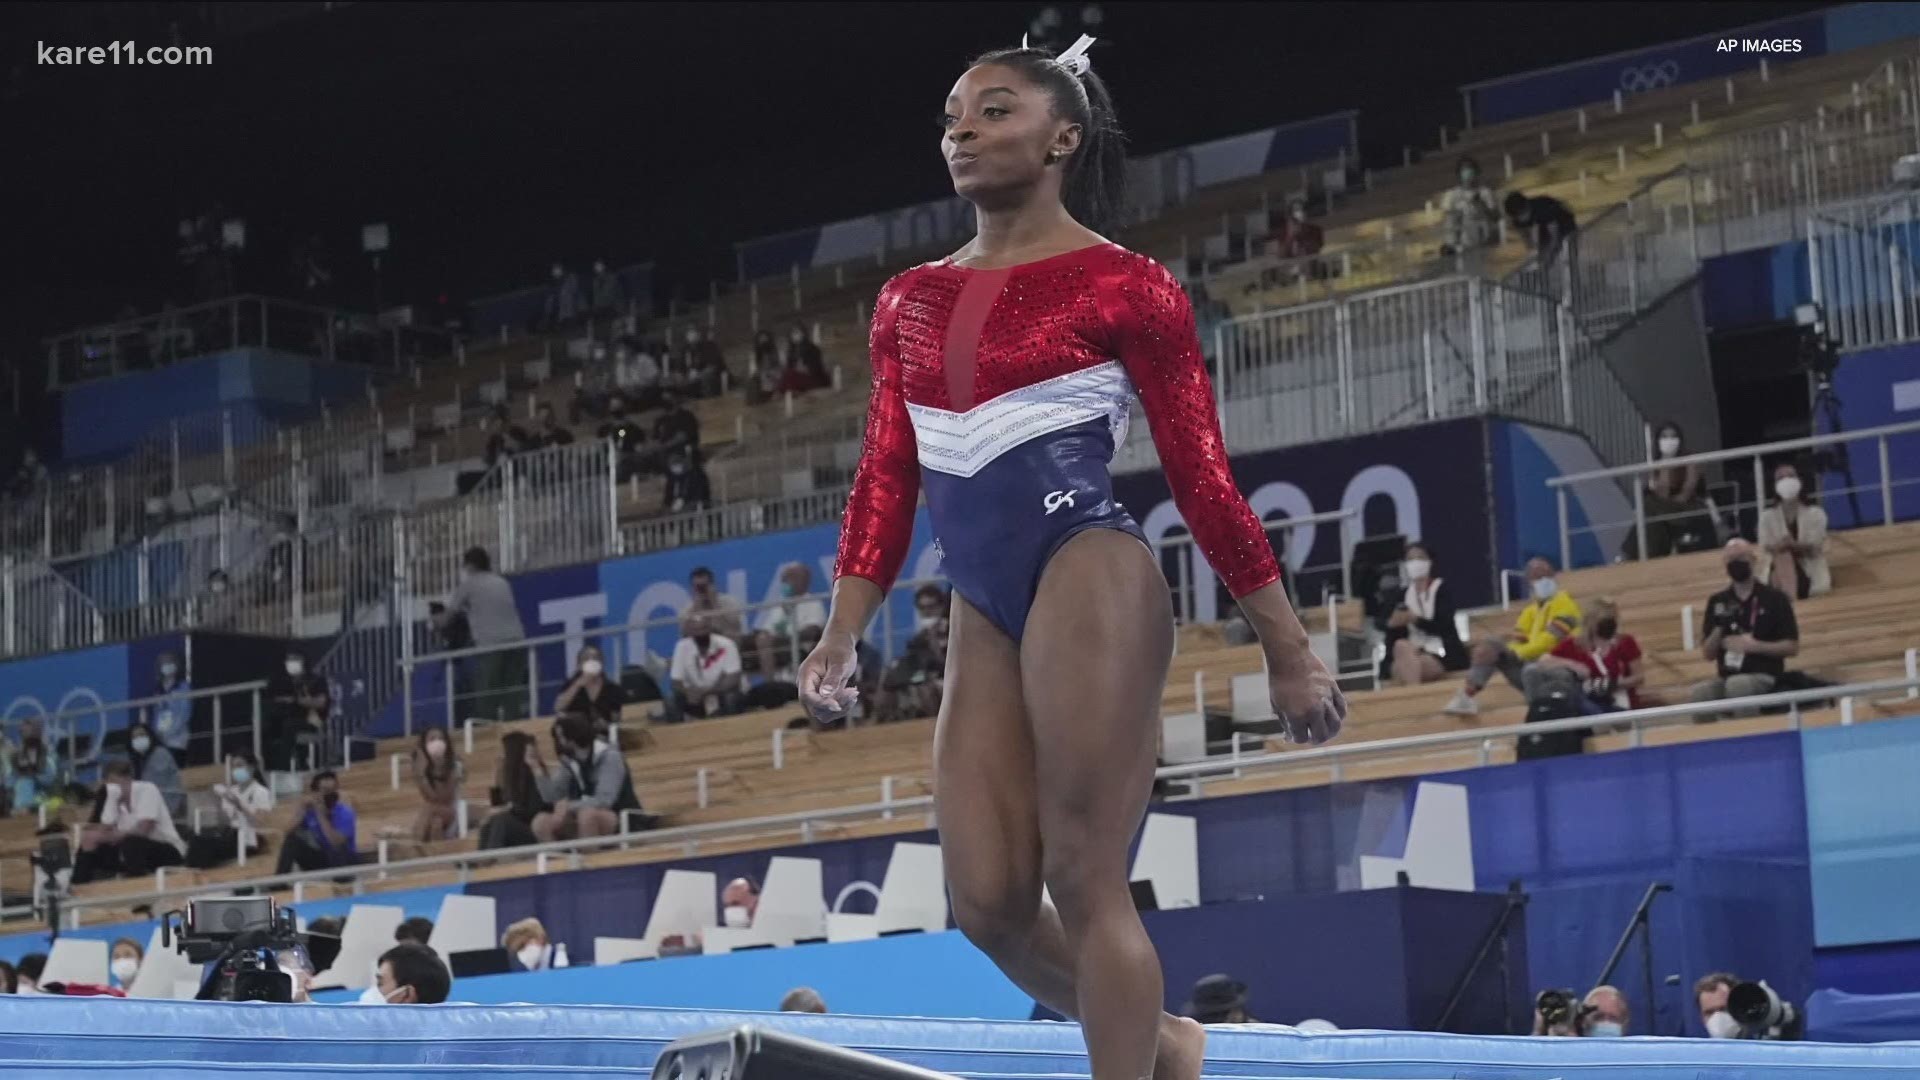 One of the greatest gymnast of all time, Simone Biles, pulled out of the women's gymnastics team final.